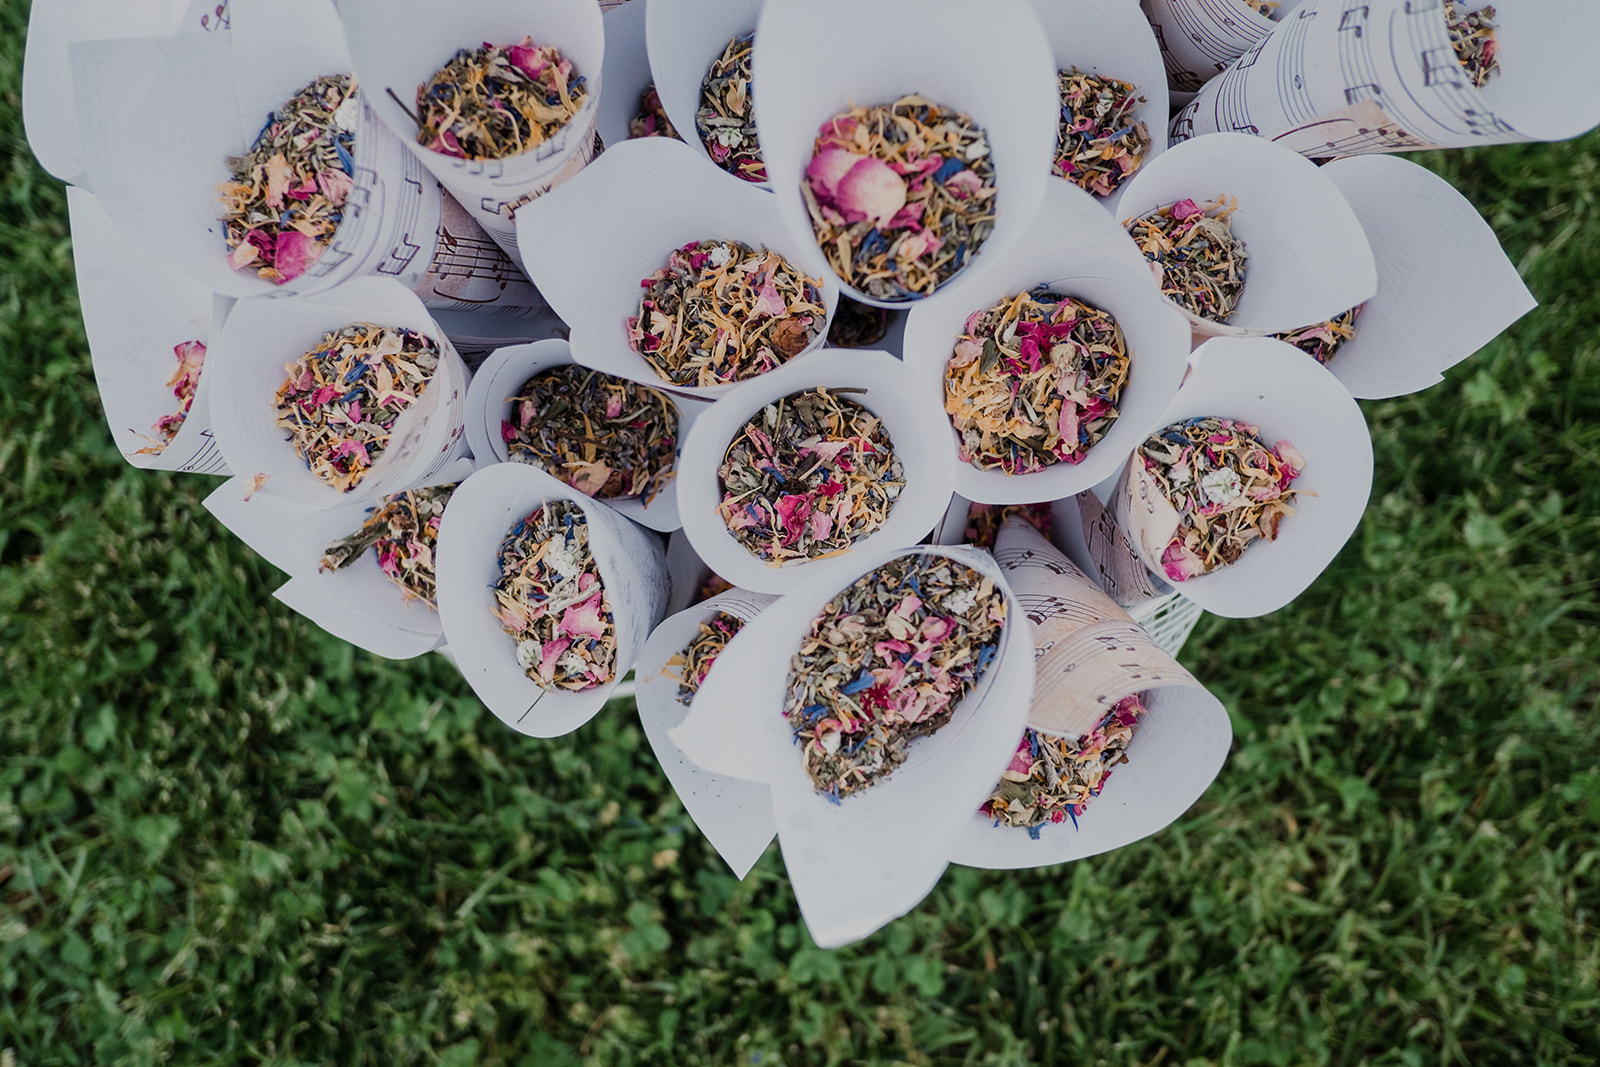 Cones filled with flower petals are ready for guests to toss at the bride and groom after their outdoor wedding ceremony at Blue Hill Farm in Waterford, VA.